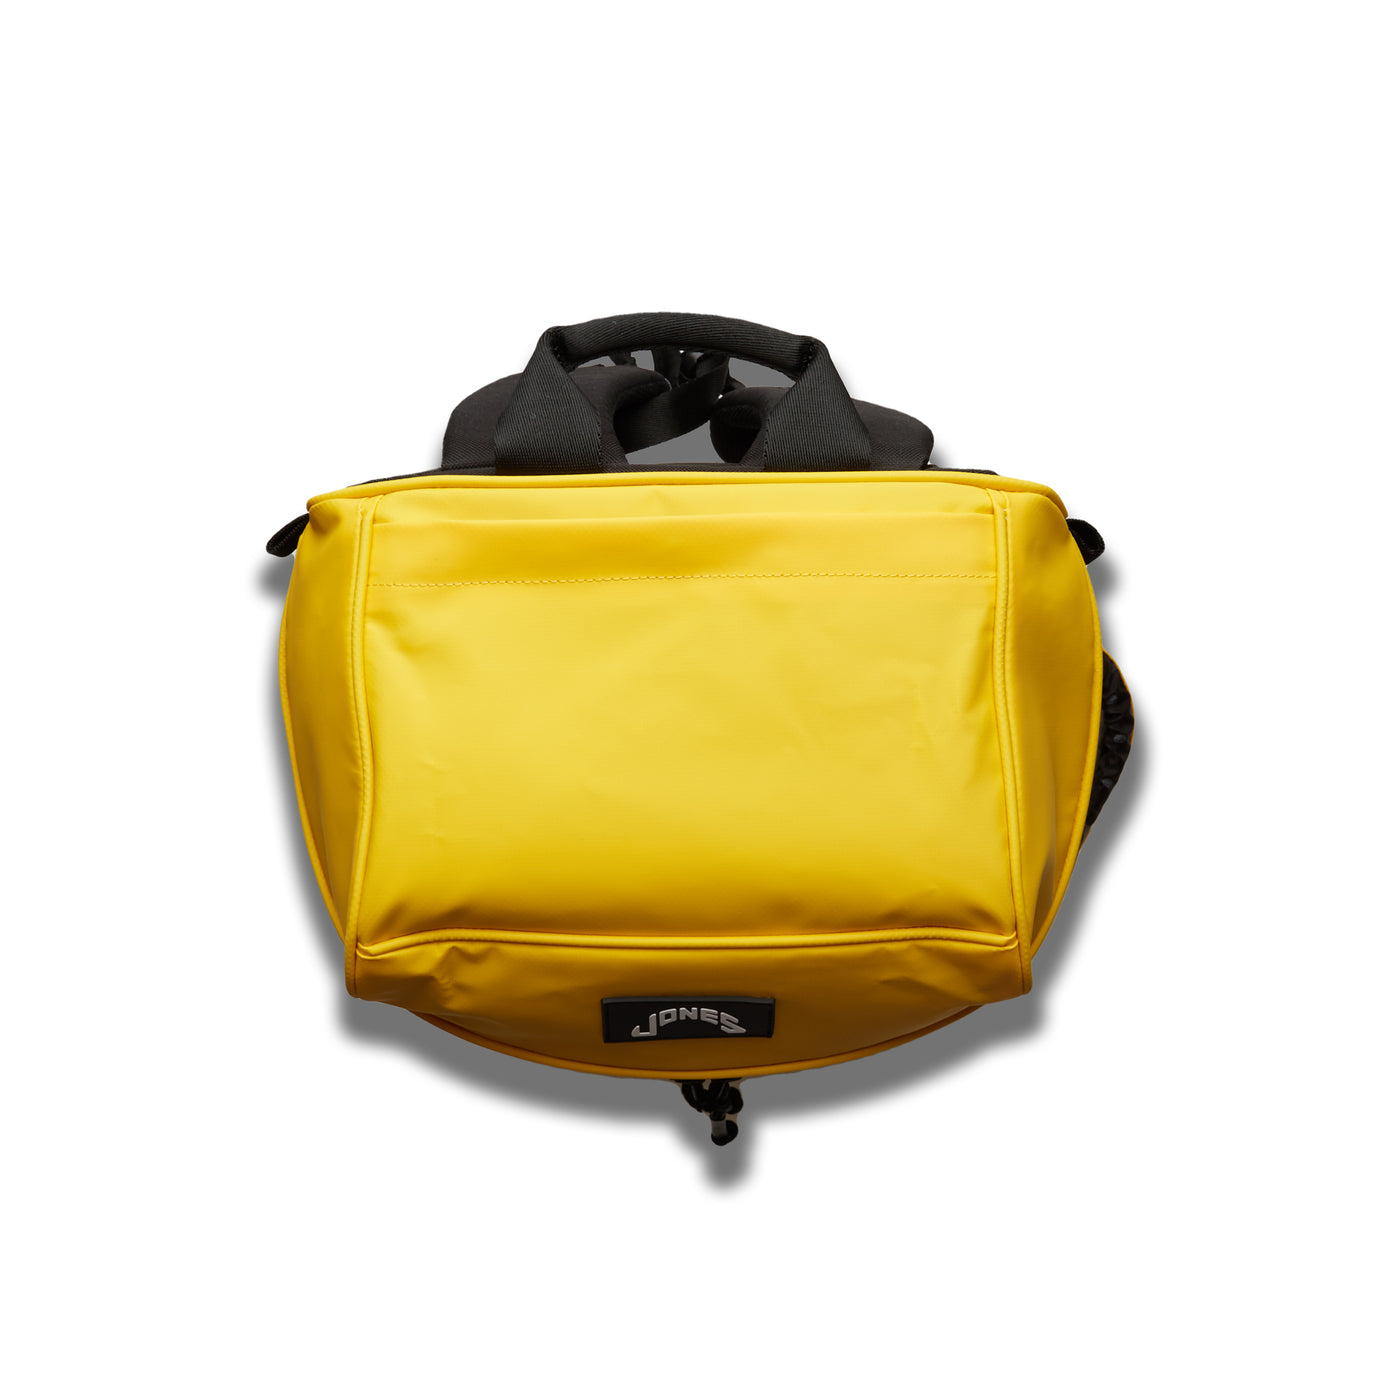 FC Scout Backpack - Yellow